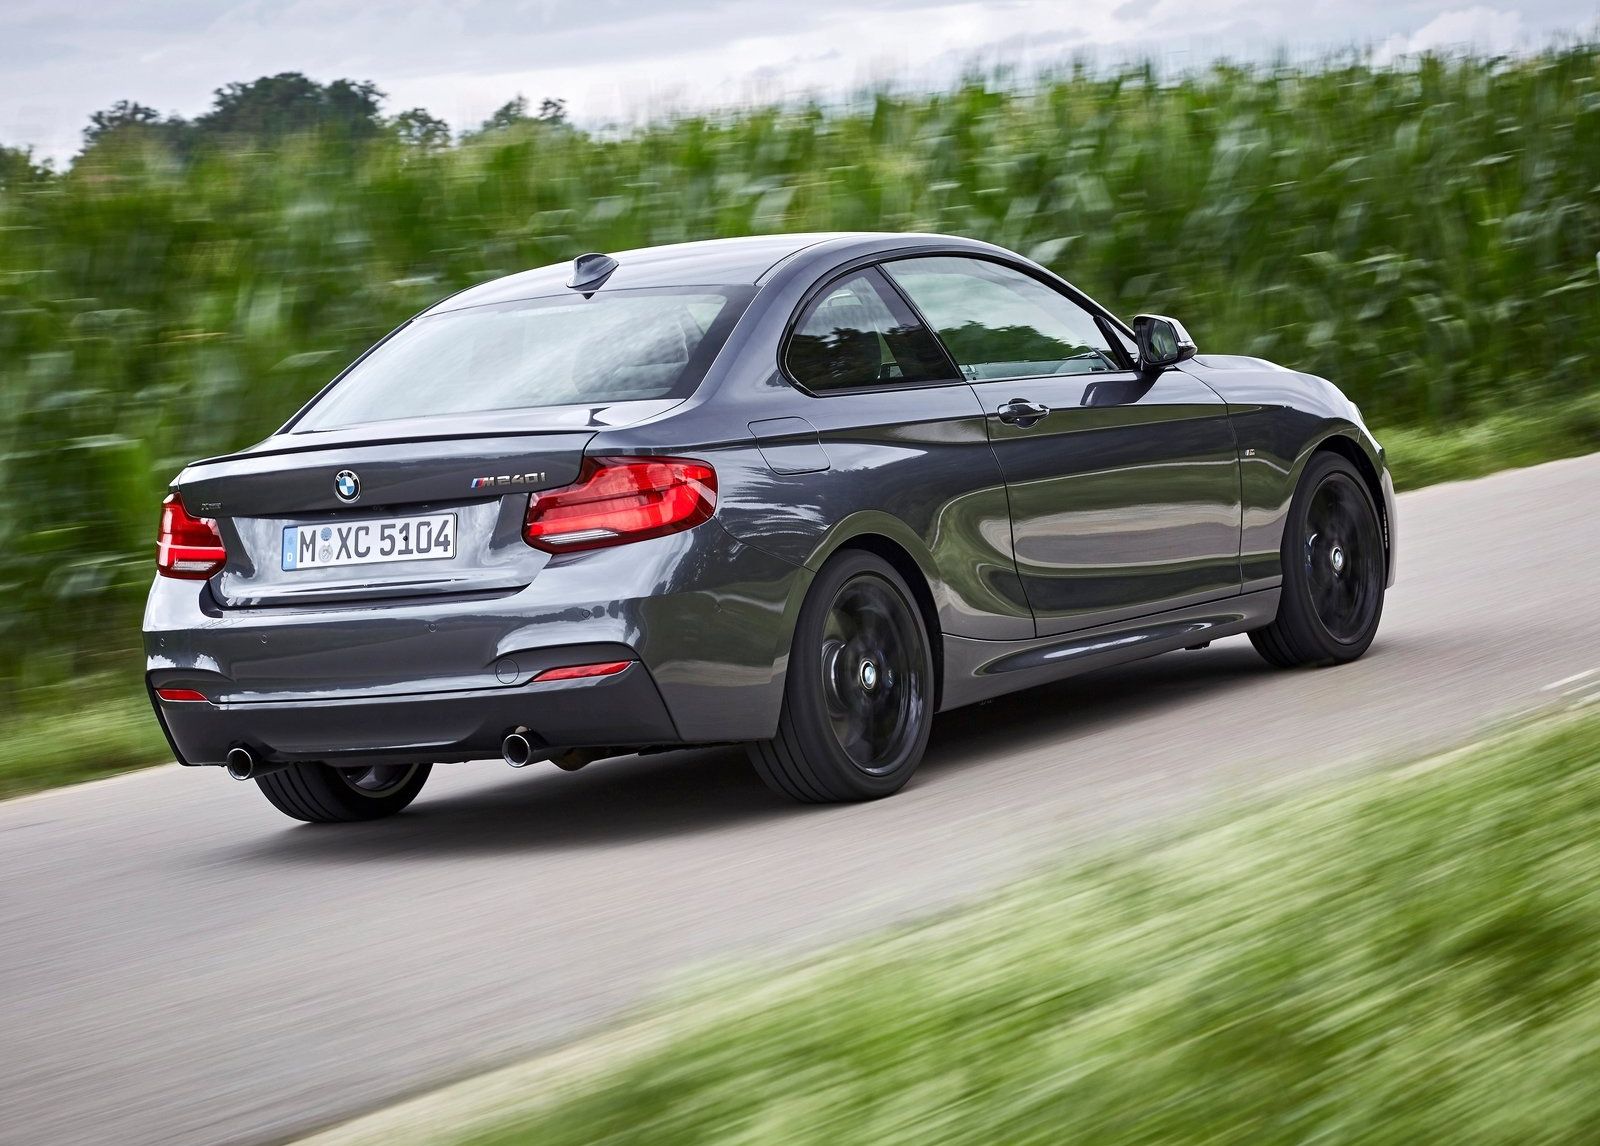 Bmw 2 serie coupe